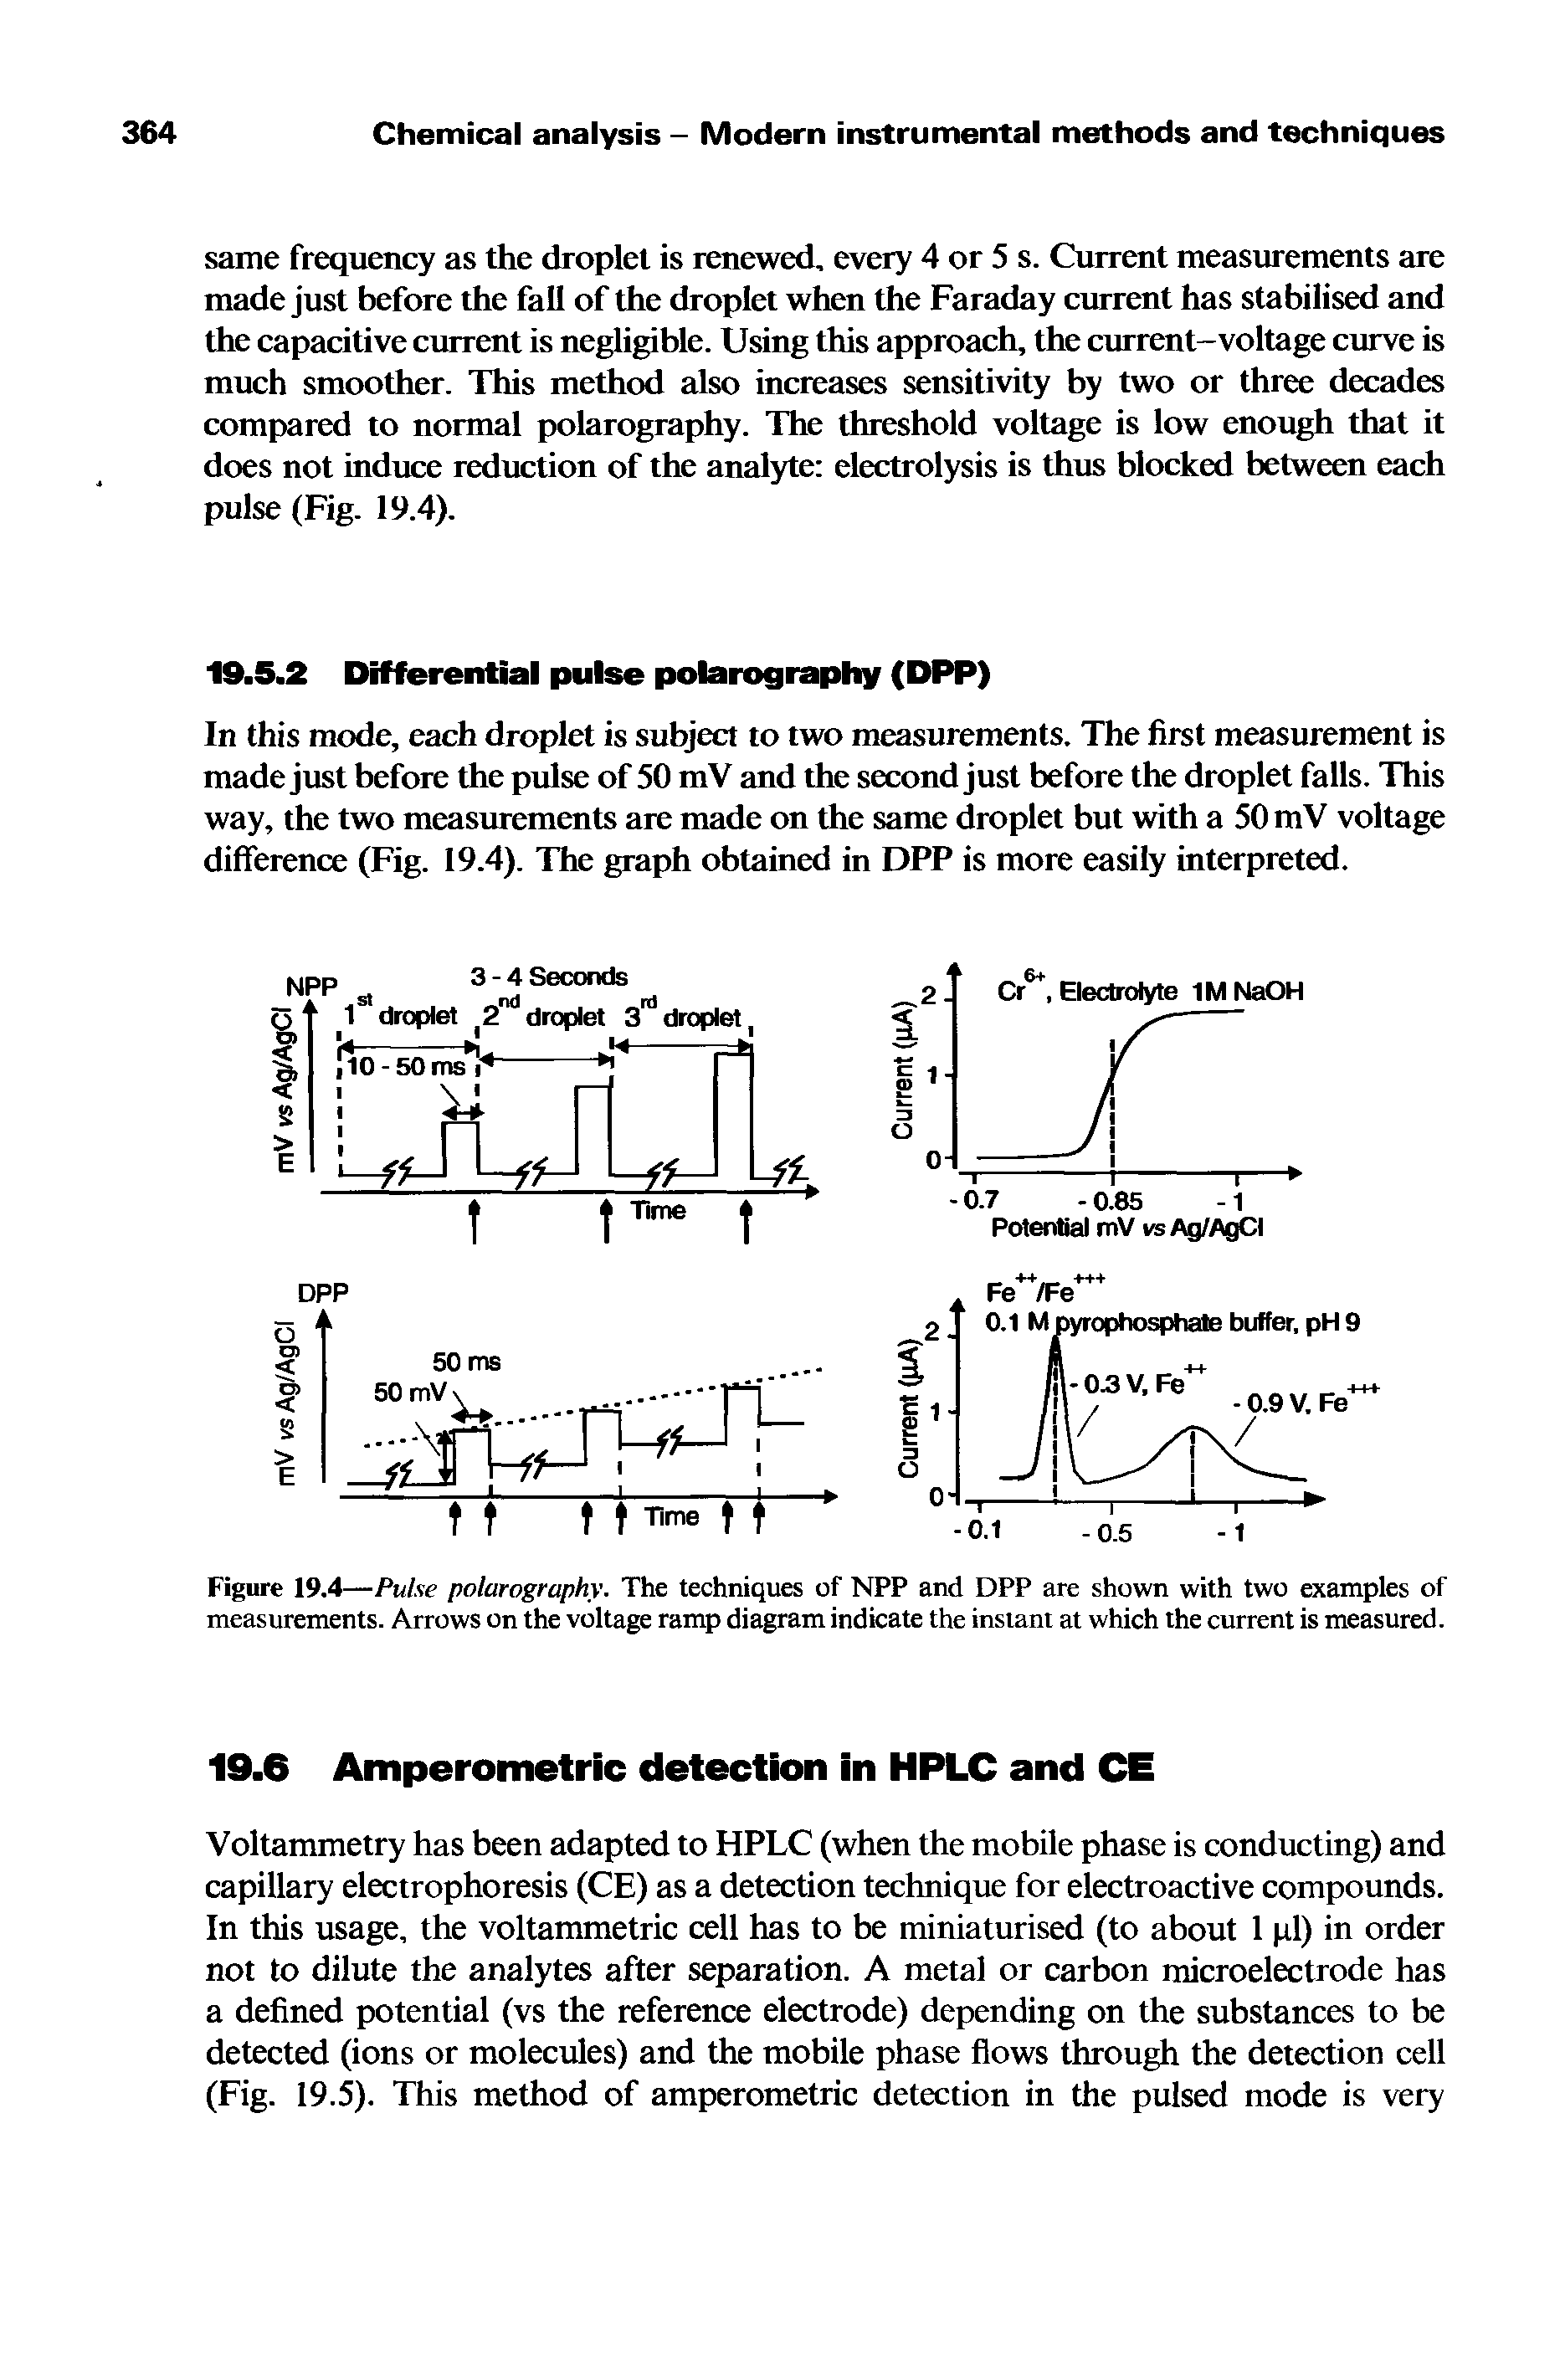 Figure 19.4—Pulse polarography. The techniques of NPP and DPP are shown with two examples of measurements. Arrows on the voltage ramp diagram indicate the instant at which the current is measured.